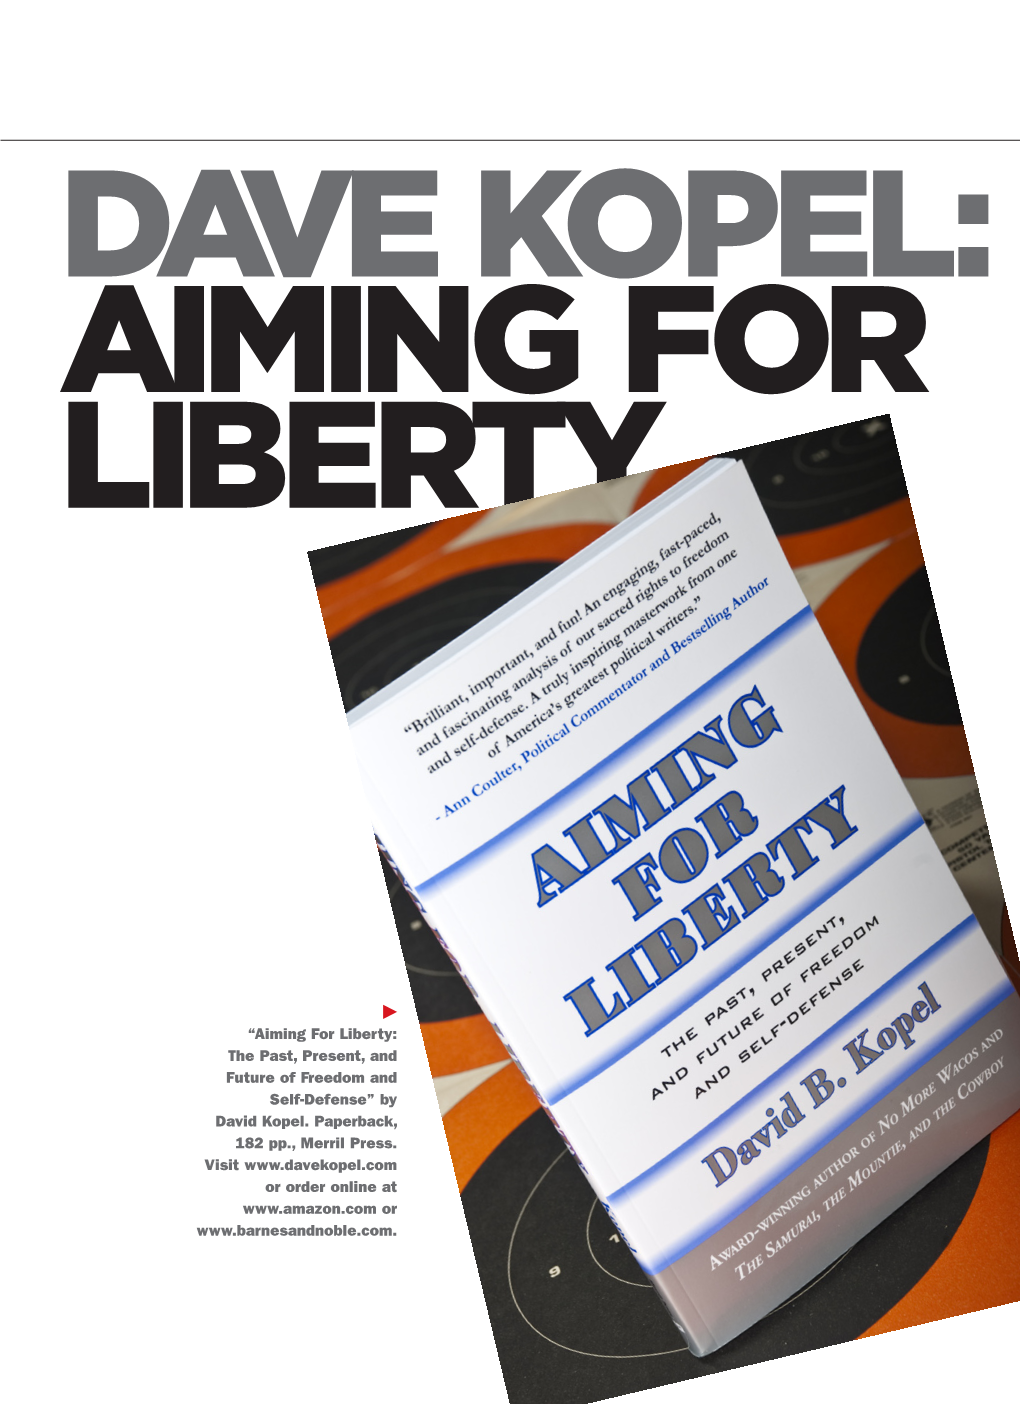 “Aiming for Liberty: the Past, Present, and Future of Freedom and Self-Defense” by David Kopel